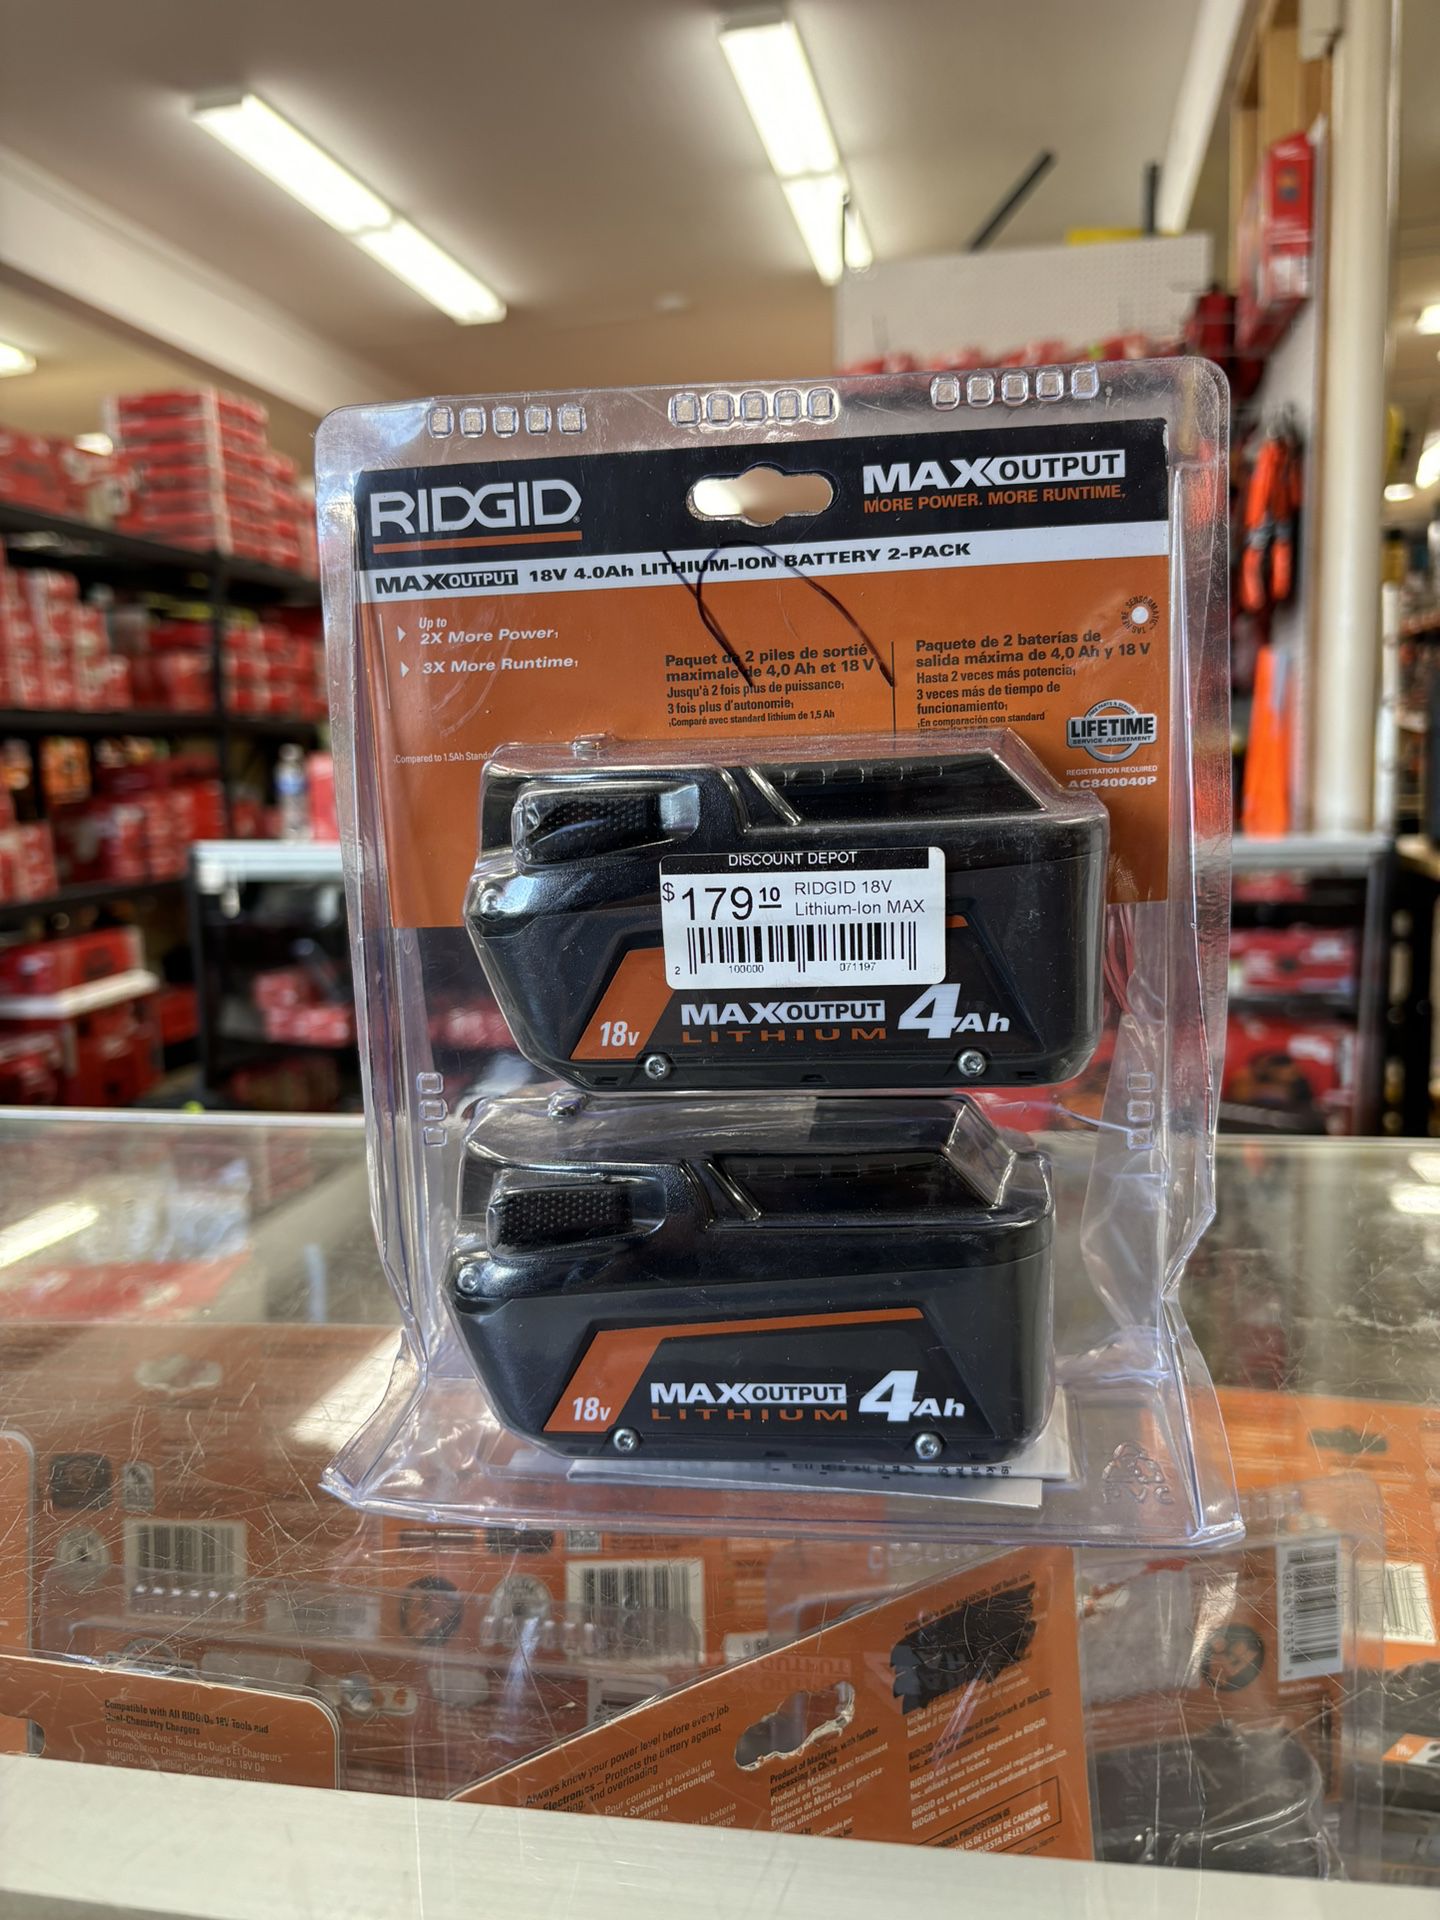 (SALE ON New) Ridgid 18v Lithium-ion MAX output 4.0 Ah Battery 